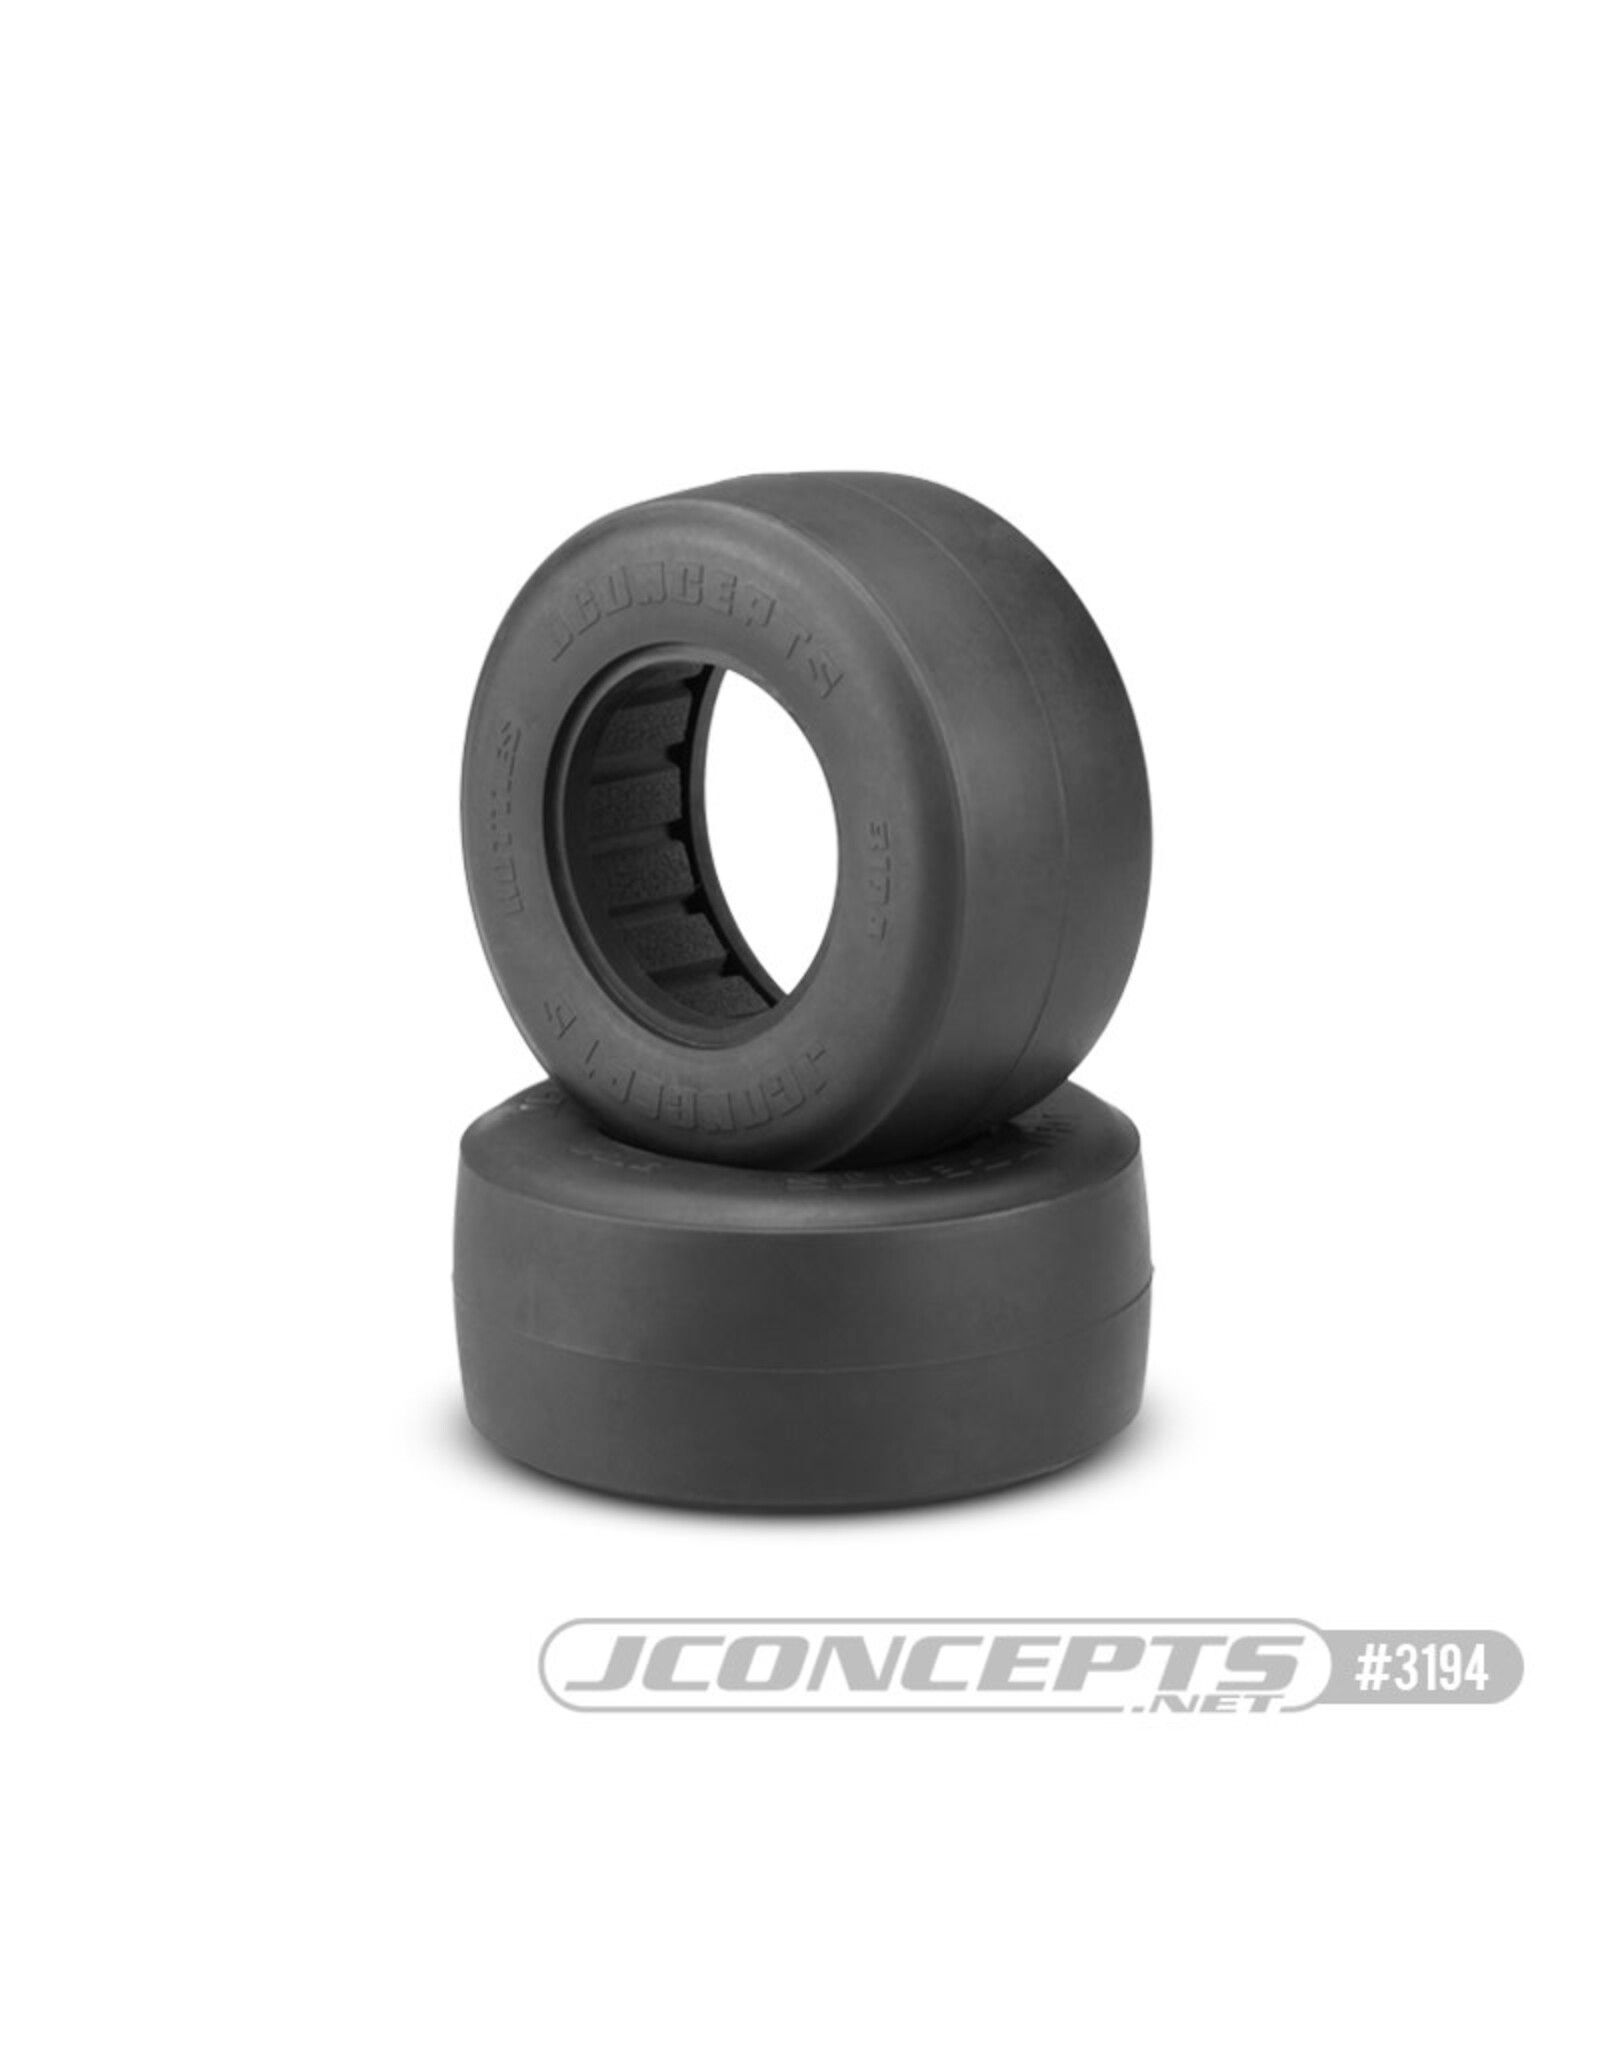 JConcepts Hotties SCT F&R tire blue comp. Belted